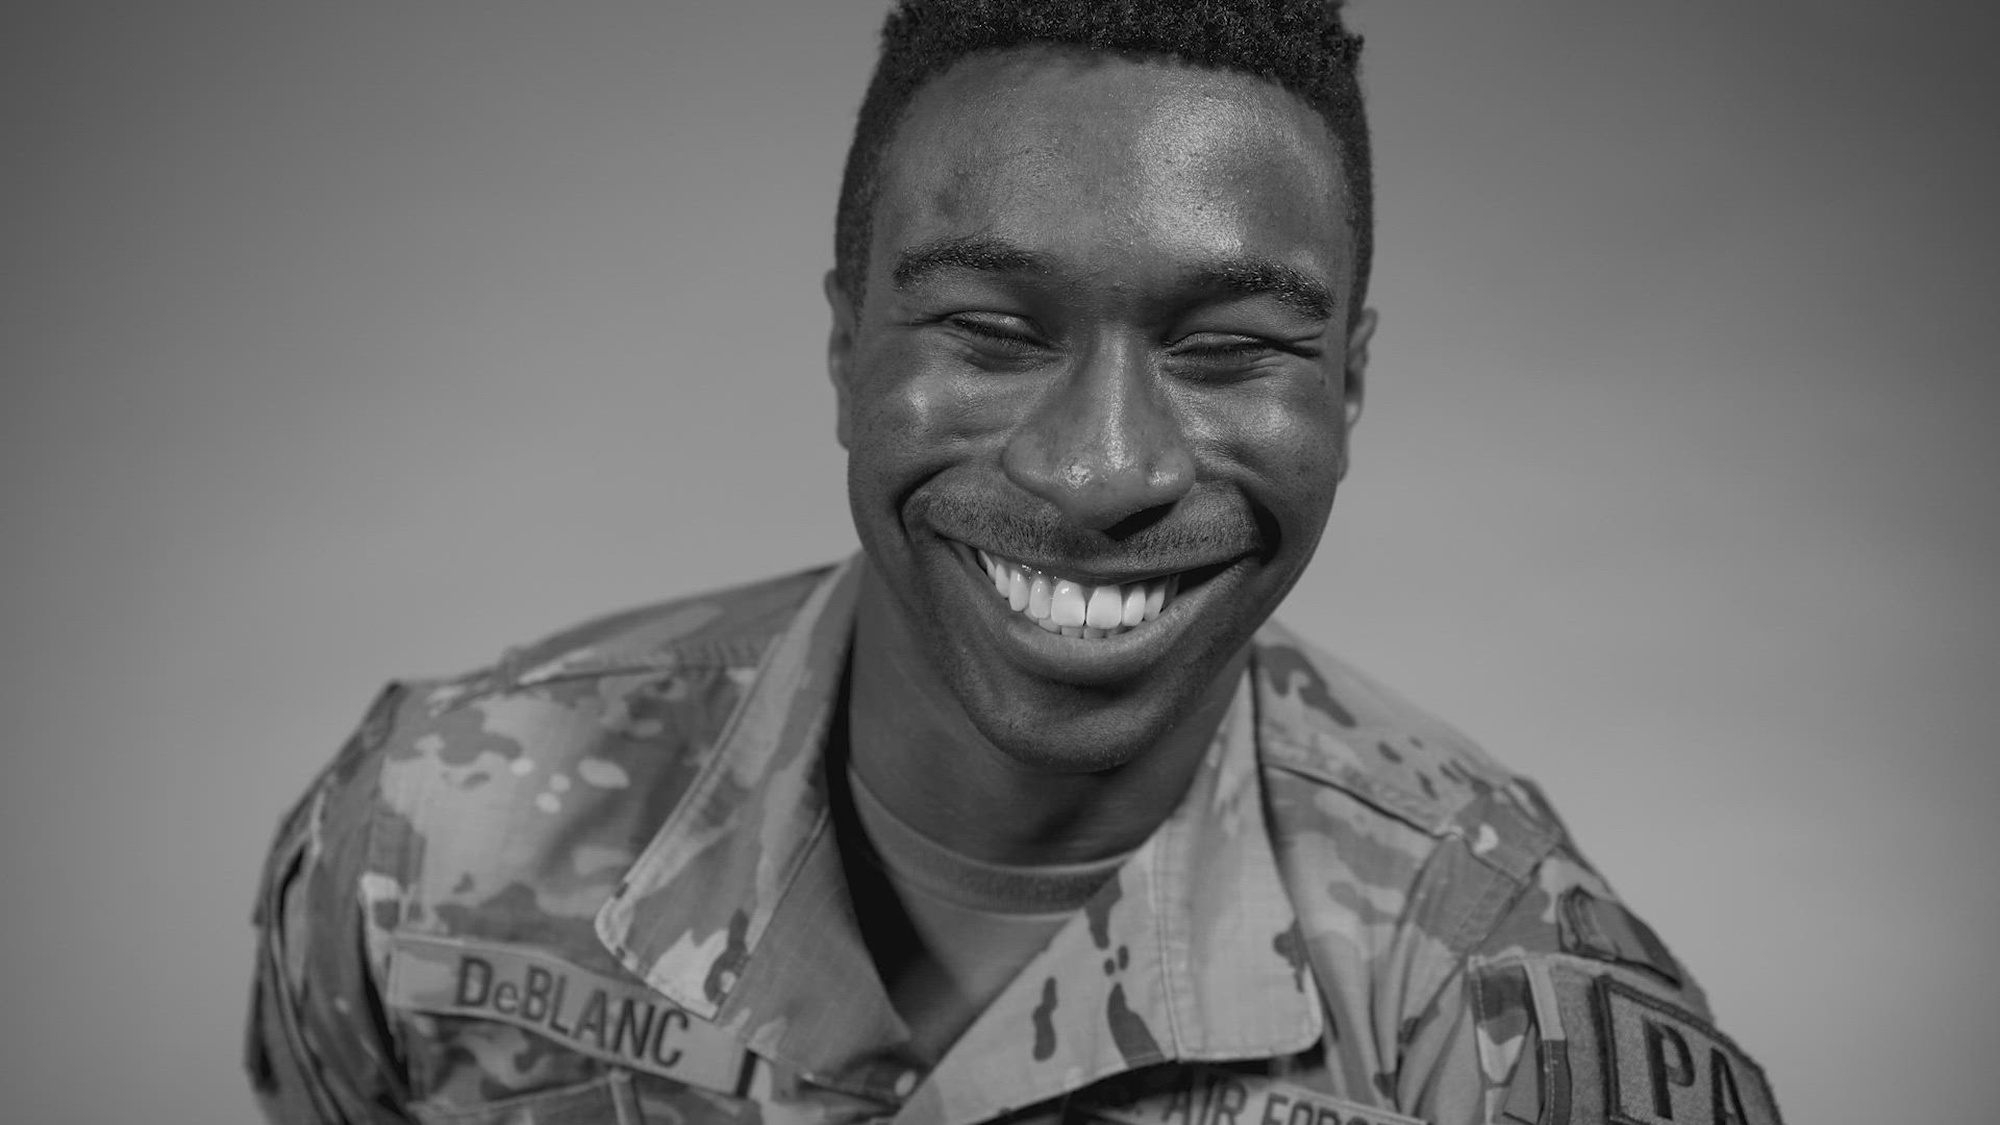 U.S. Air Force 2nd Lt. Brandon DeBlanc shares his story Feb. 22, 2023, at Joint Base Anacostia-Bolling, Washington, D.C. DeBlanc talked about his life as a Black child and how it has shaped him into the leader he is today.